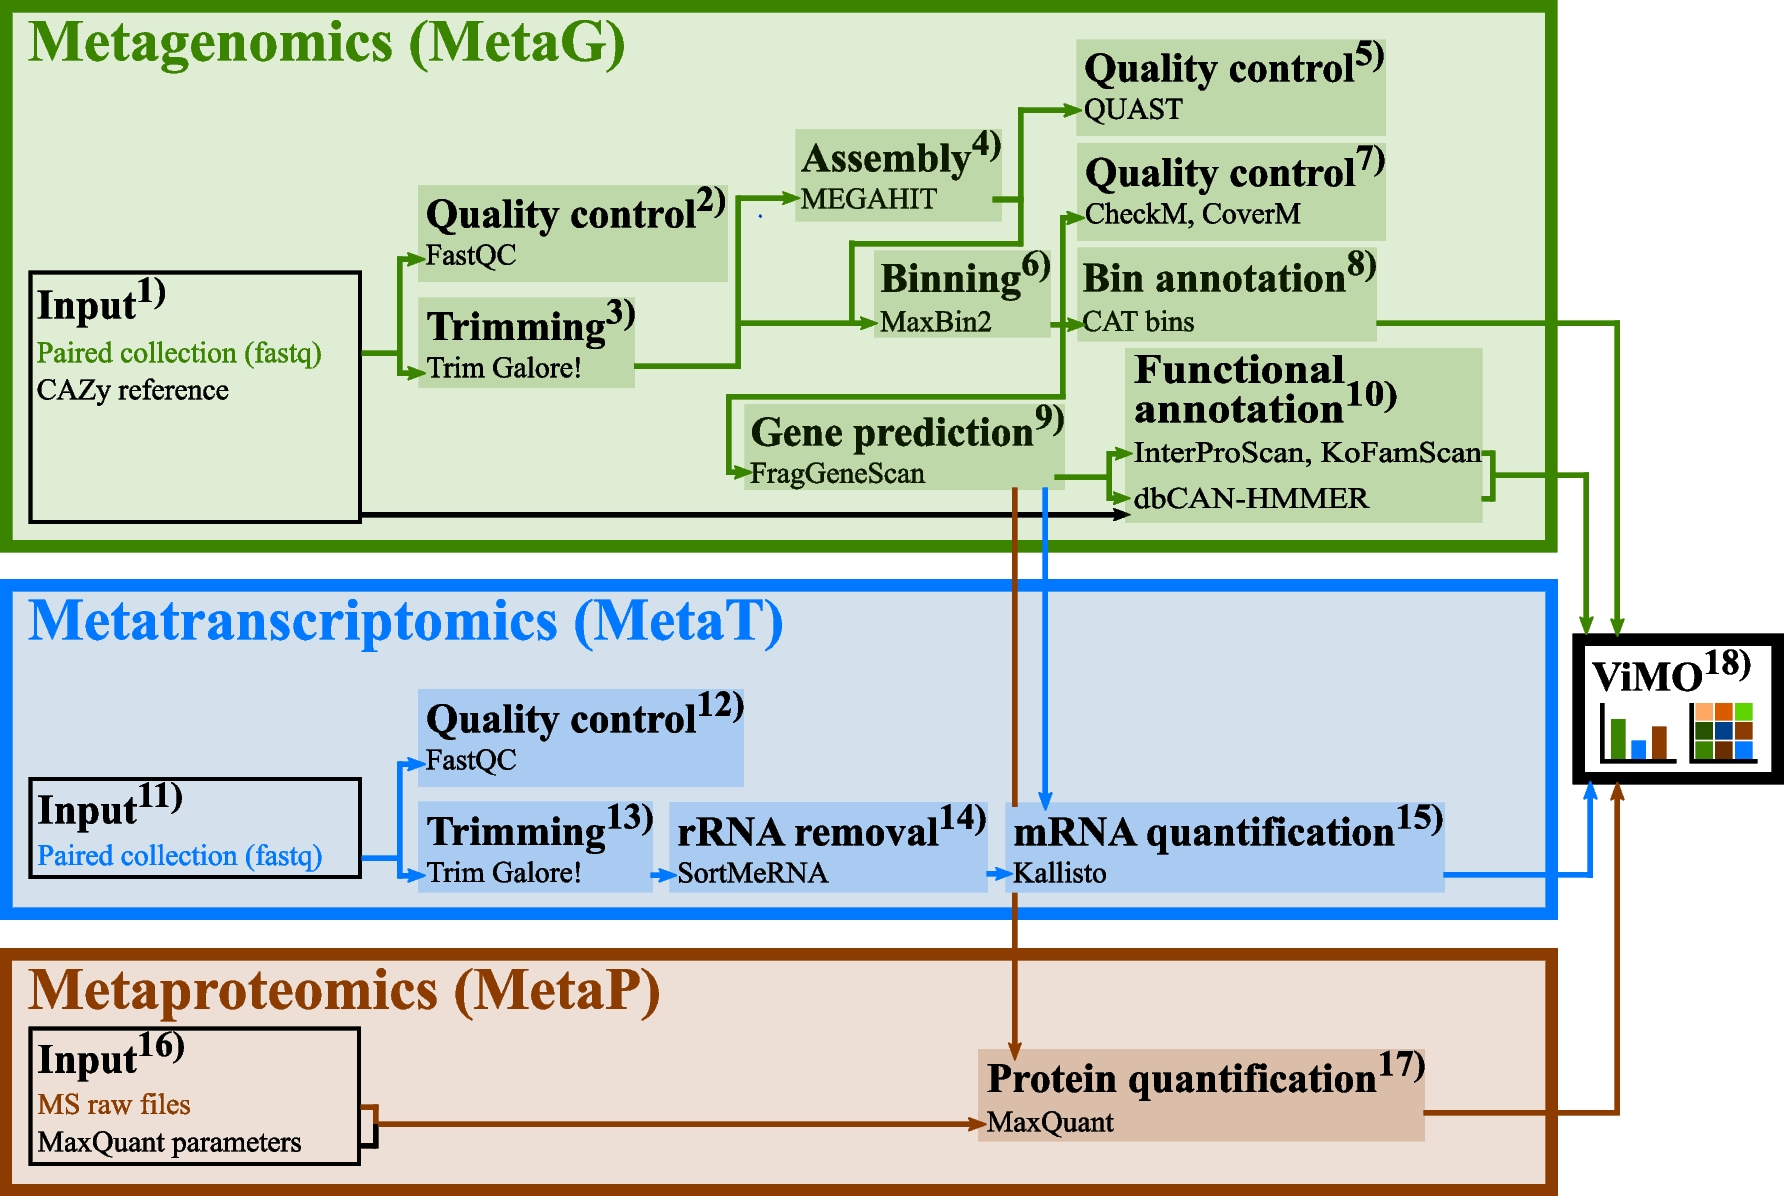 Workflows for meta-omics. The integrated analysis of meta-omics contains a MetaG, MetaT and MetaP workflow. MetaG includes data preprocessing steps with quality control and trimming, followed by assembling, binning and taxonomically annotation of the MAGs. Open reading frames (ORFs) and nucleotide sequences are predicted by FragGeneScan. Functional annotation is performed by InterProScan and dbCAN-HMMER. The predicted ORFs and nucleotide sequences are further used in the MetaP and MetaT workflow; hence, the MetaG serves as the base analysis and the MetaT and MetaP are mapped onto the MetaG. After preprocessing the data and rRNA removal, the predicted nucleotide sequences from the MetaG workflow are used for the mRNA quantification and mapping by Kallisto, as well as for MaxQuant in the MetaP workflow